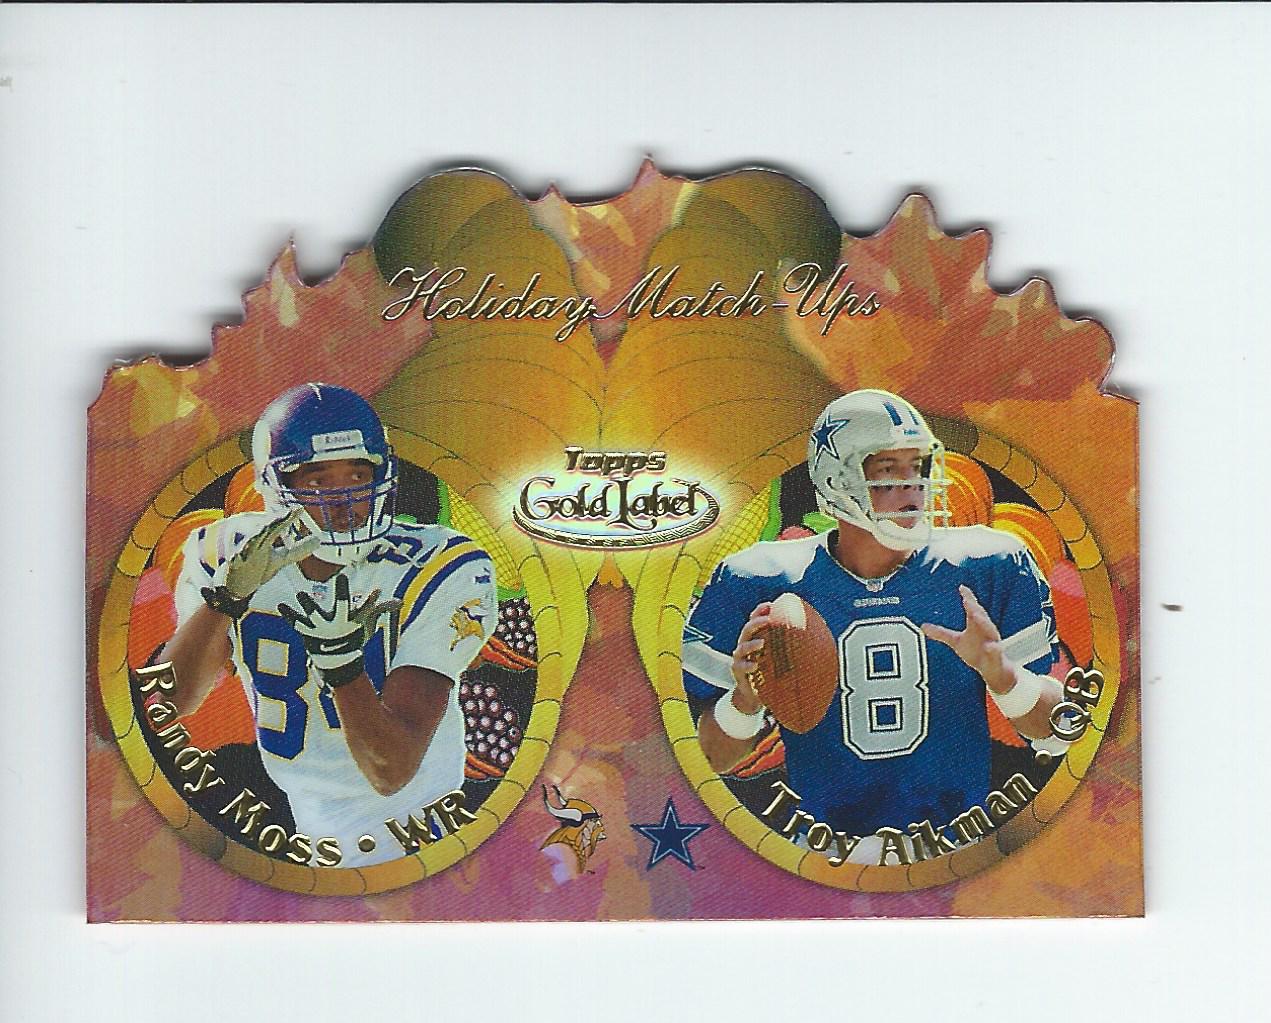 2000 Topps Gold Label Holiday Match-Ups Fall #T1B Randy Moss/Troy Aikman/Cowboys name on back